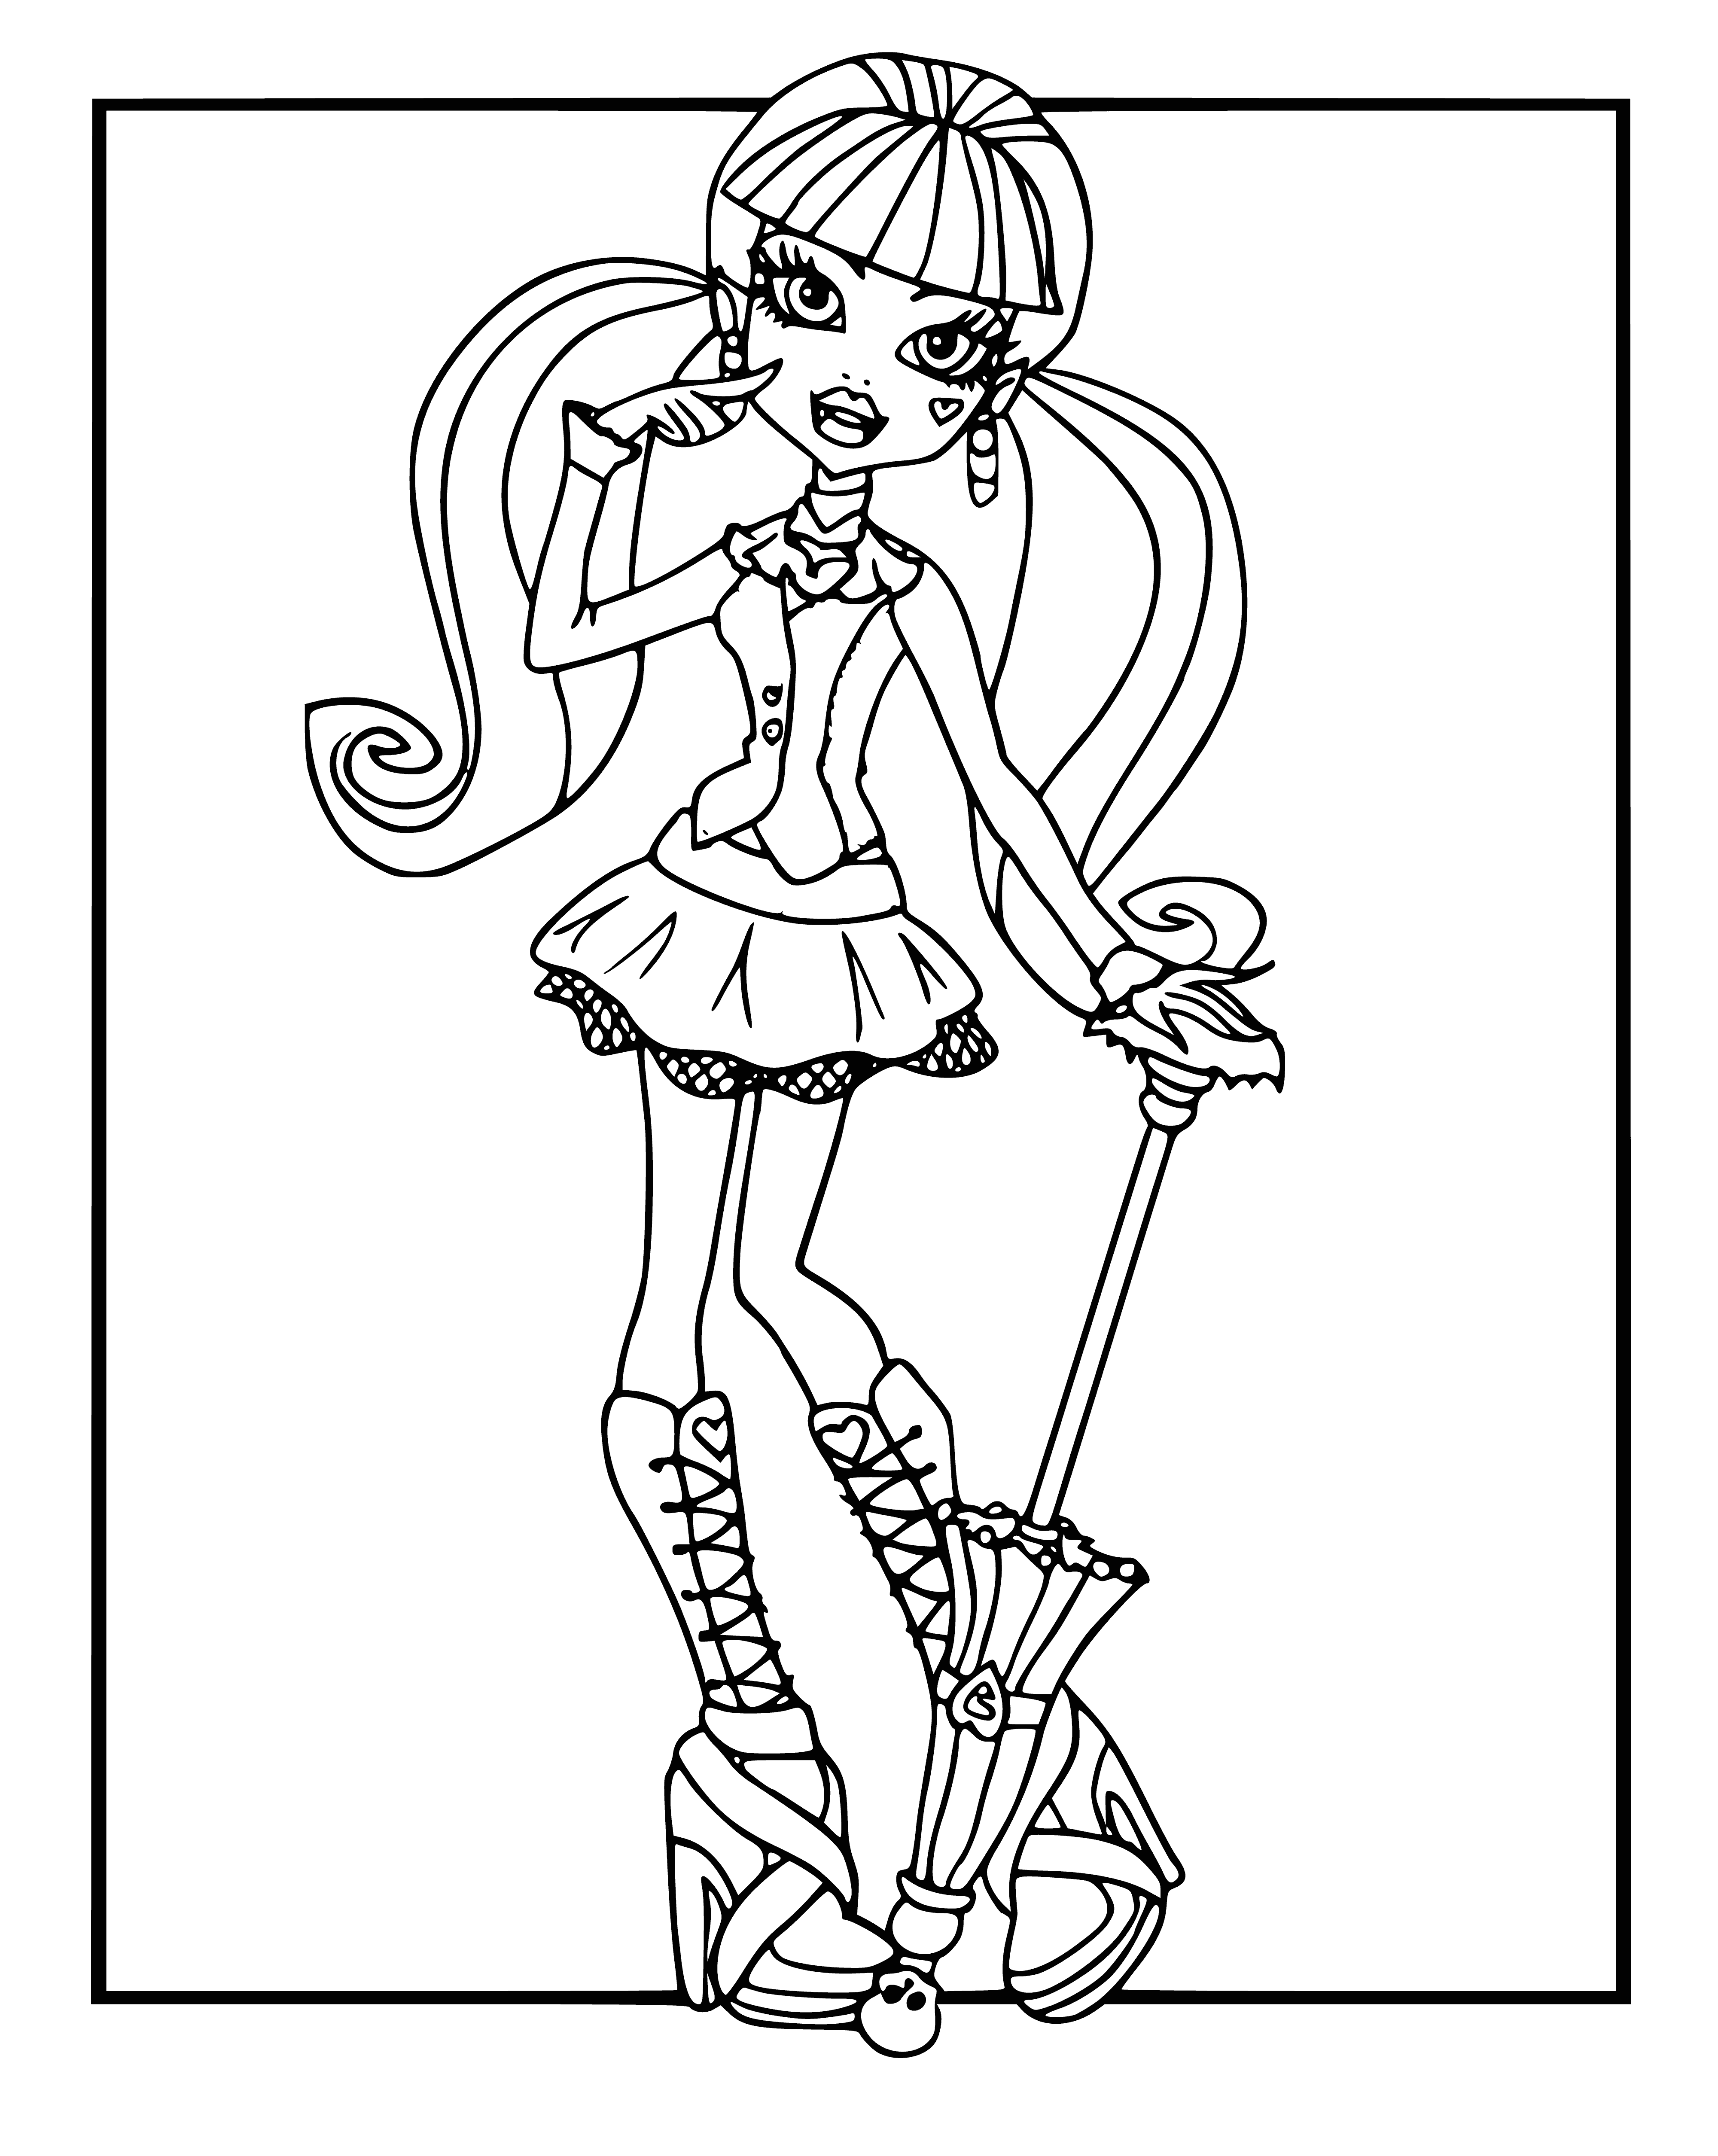 coloring page: Draculaura holds an umbrella and wears a printed dress, purple cape, and styled hair with pink streaks. #MonsterHigh